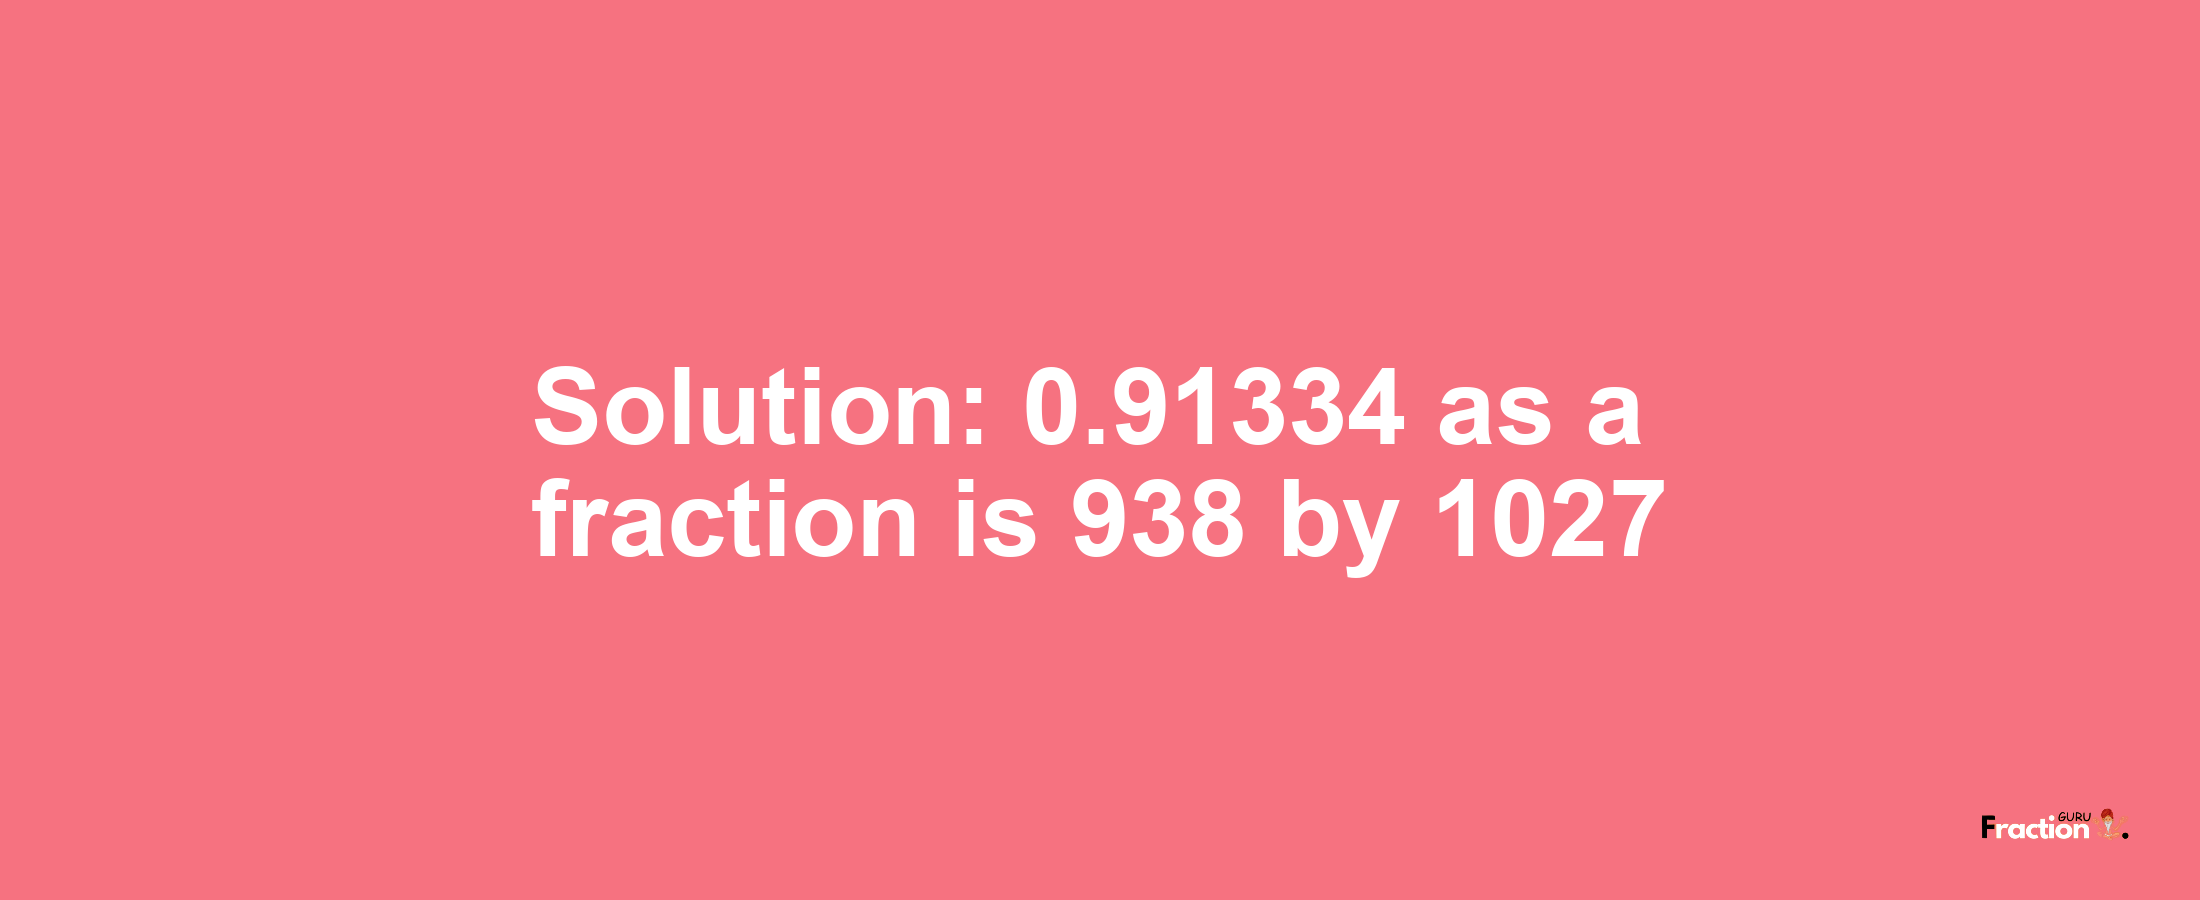 Solution:0.91334 as a fraction is 938/1027